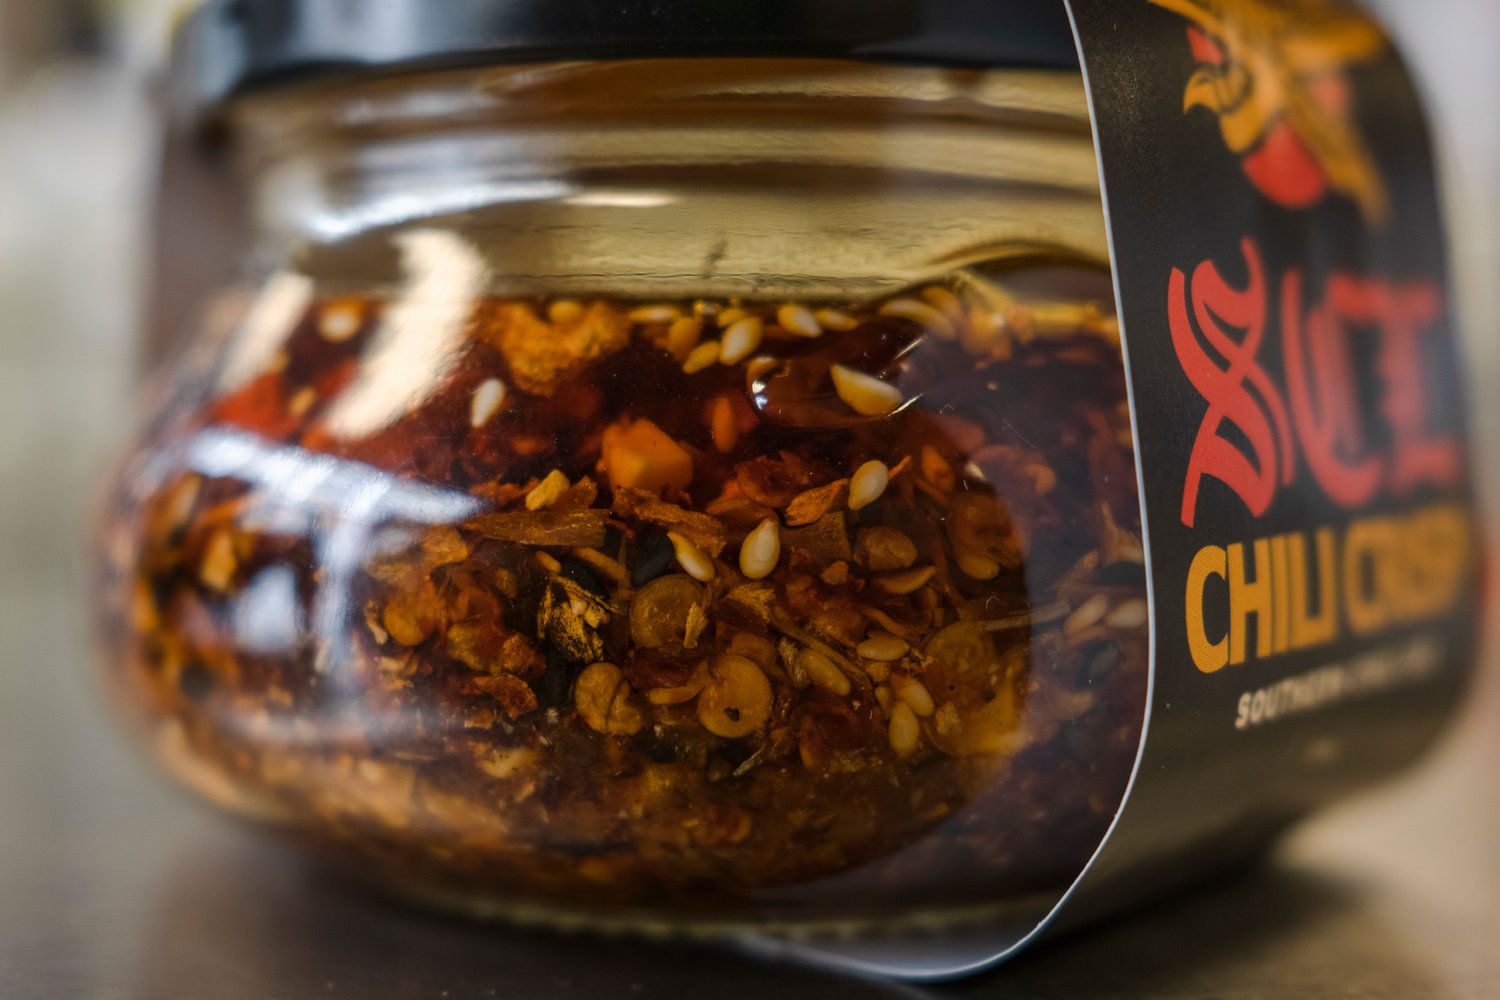 Chili crisp is a two-for-one condiment. The crisp adds flavor and texture to anything from soft cheese and scrambled eggs to dessert. The oil can be used for cooking or finishing a dish. The Southern Chili Lab's red chili crisp has a nice heat that will not ruin your palate.